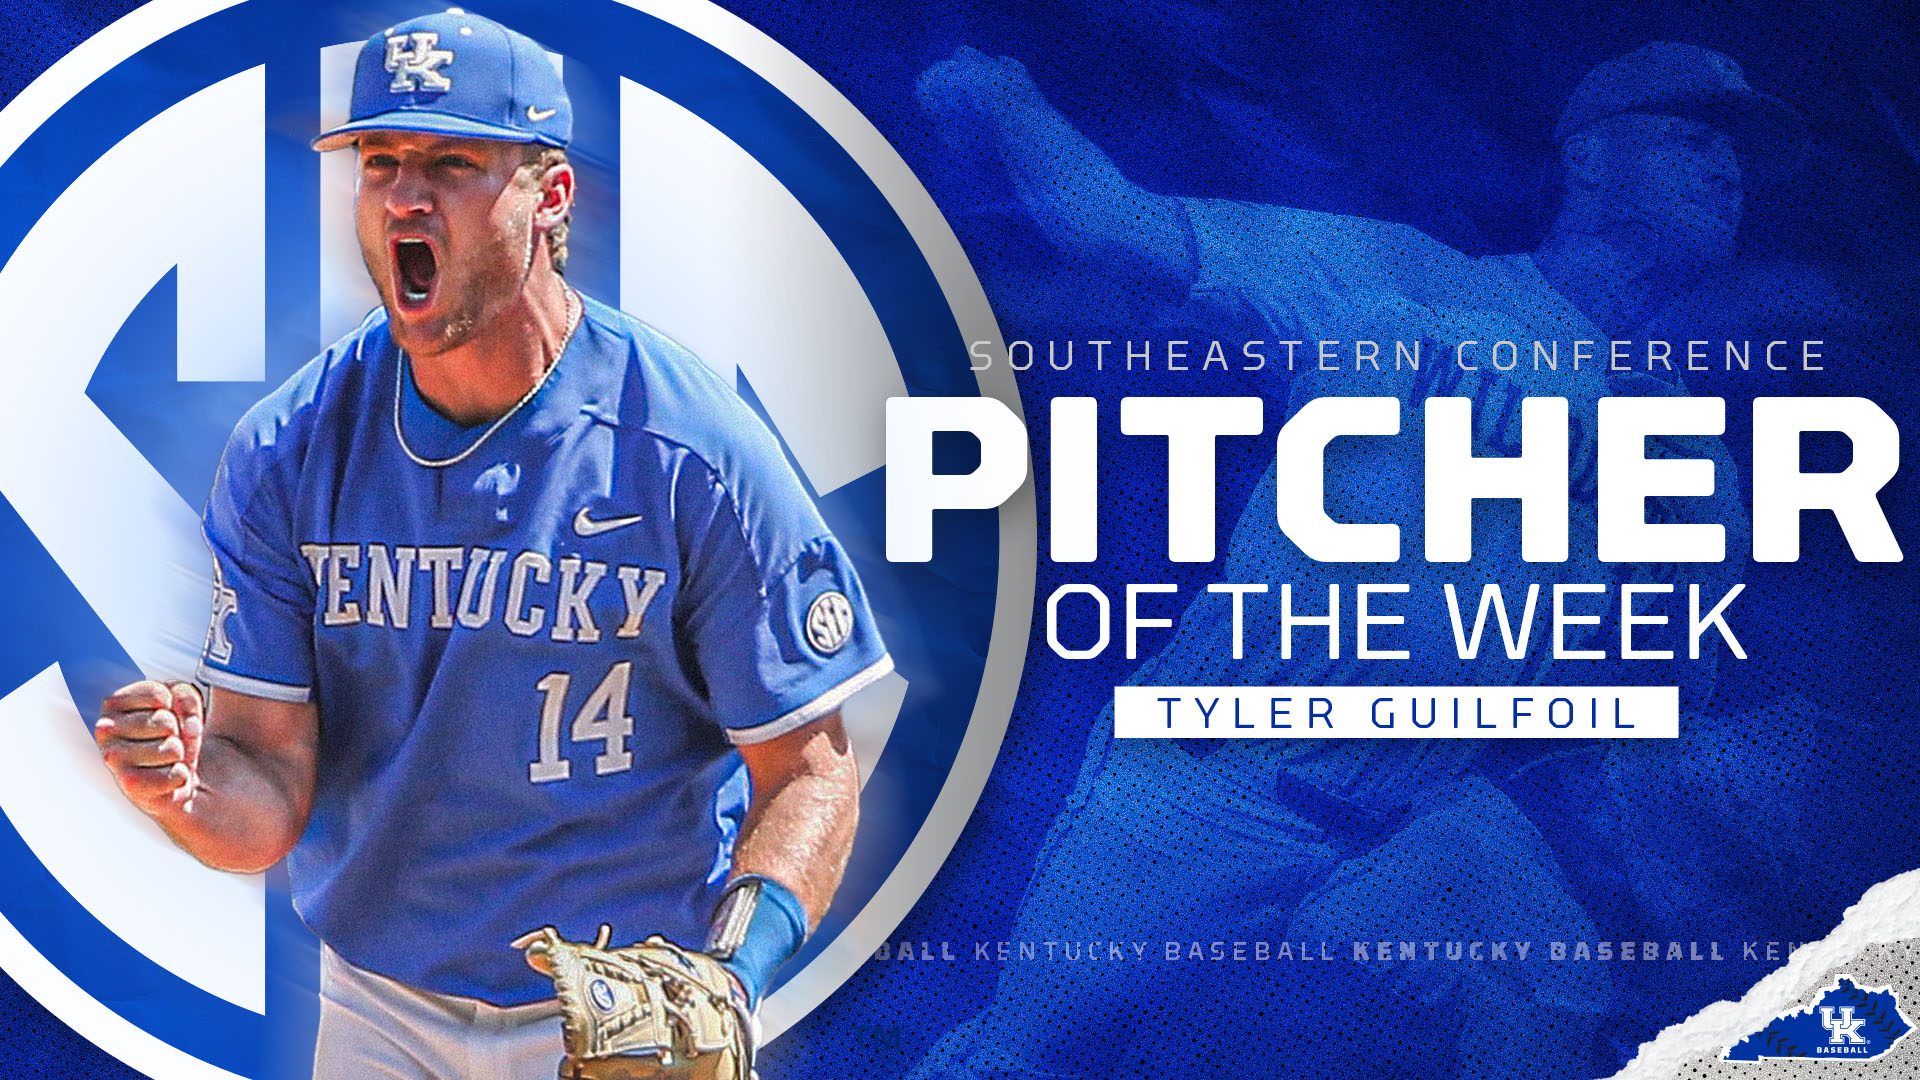 Tyler Guilfoil Named Southeastern Conference Pitcher of the Week